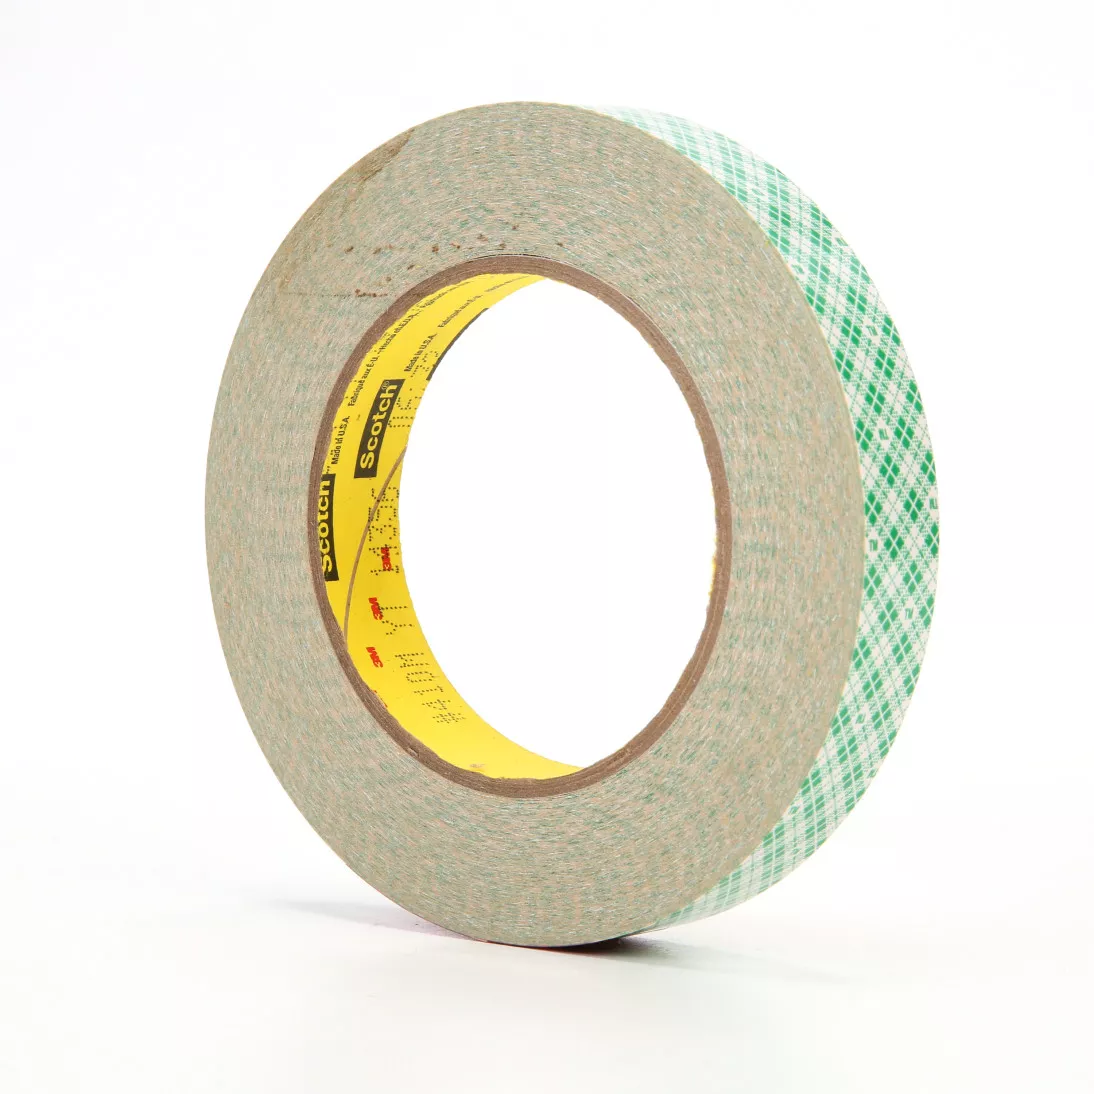 3M™ Double Coated Paper Tape 410M, Natural, 3/4 in x 36 yd, 5 mil, 48
rolls per case